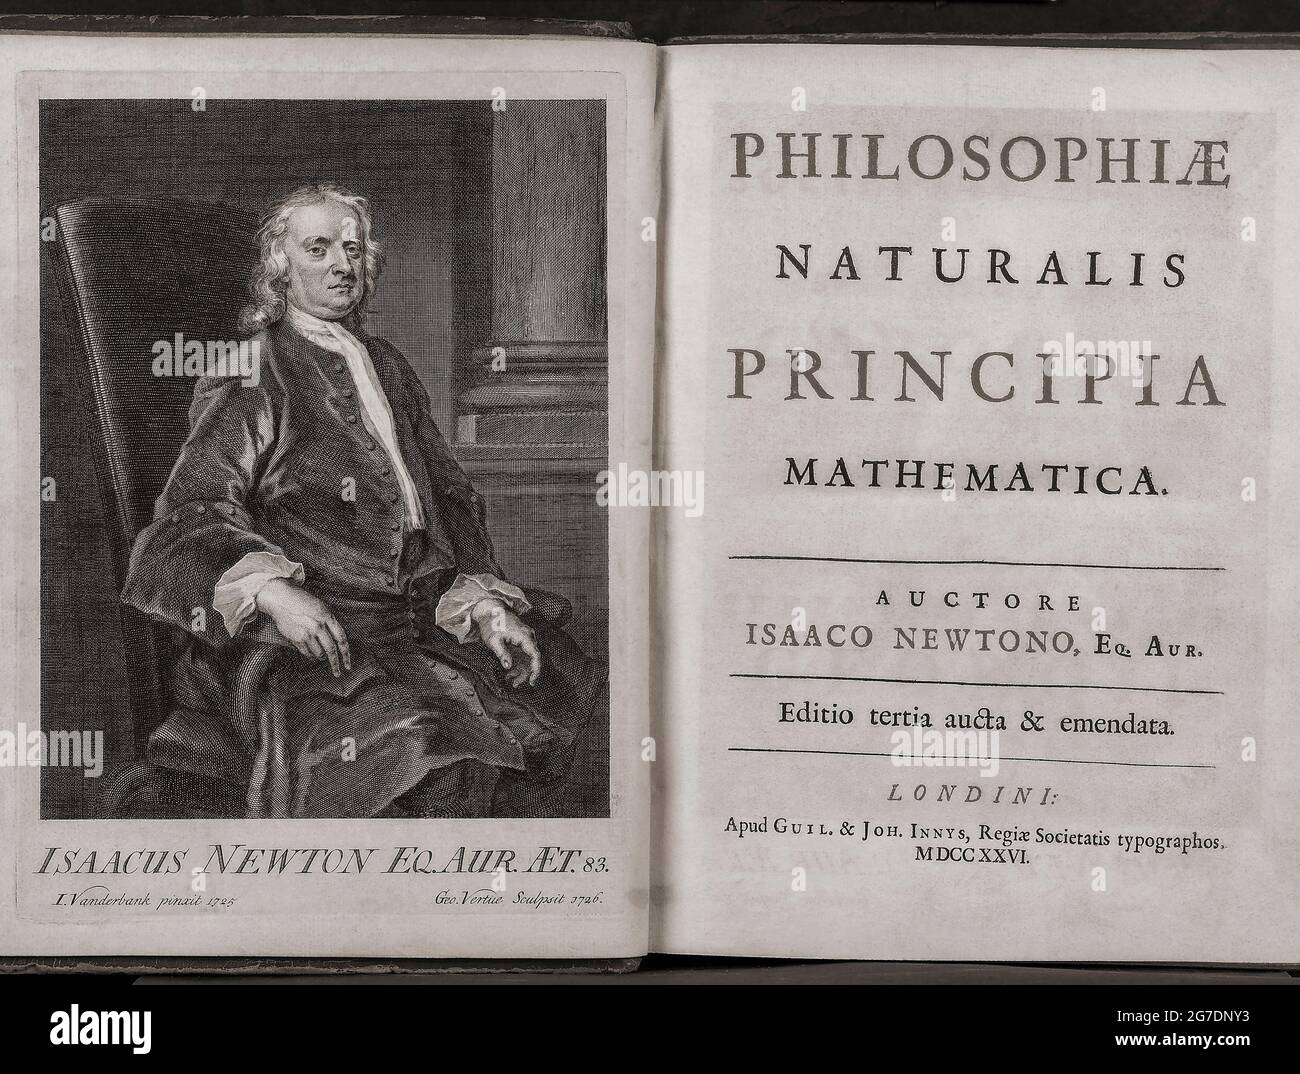 Philosophiæ Naturalis Principia Mathematica, or Mathematical Principles of Natural Philosophy, commonly known as the Principia by Sir Isaac Newton.  Newton published the Principia in three volumes, in Latin, in 1687.  This is the title page of the amended third edition published in 1726, the year of Newton's death. Stock Photo